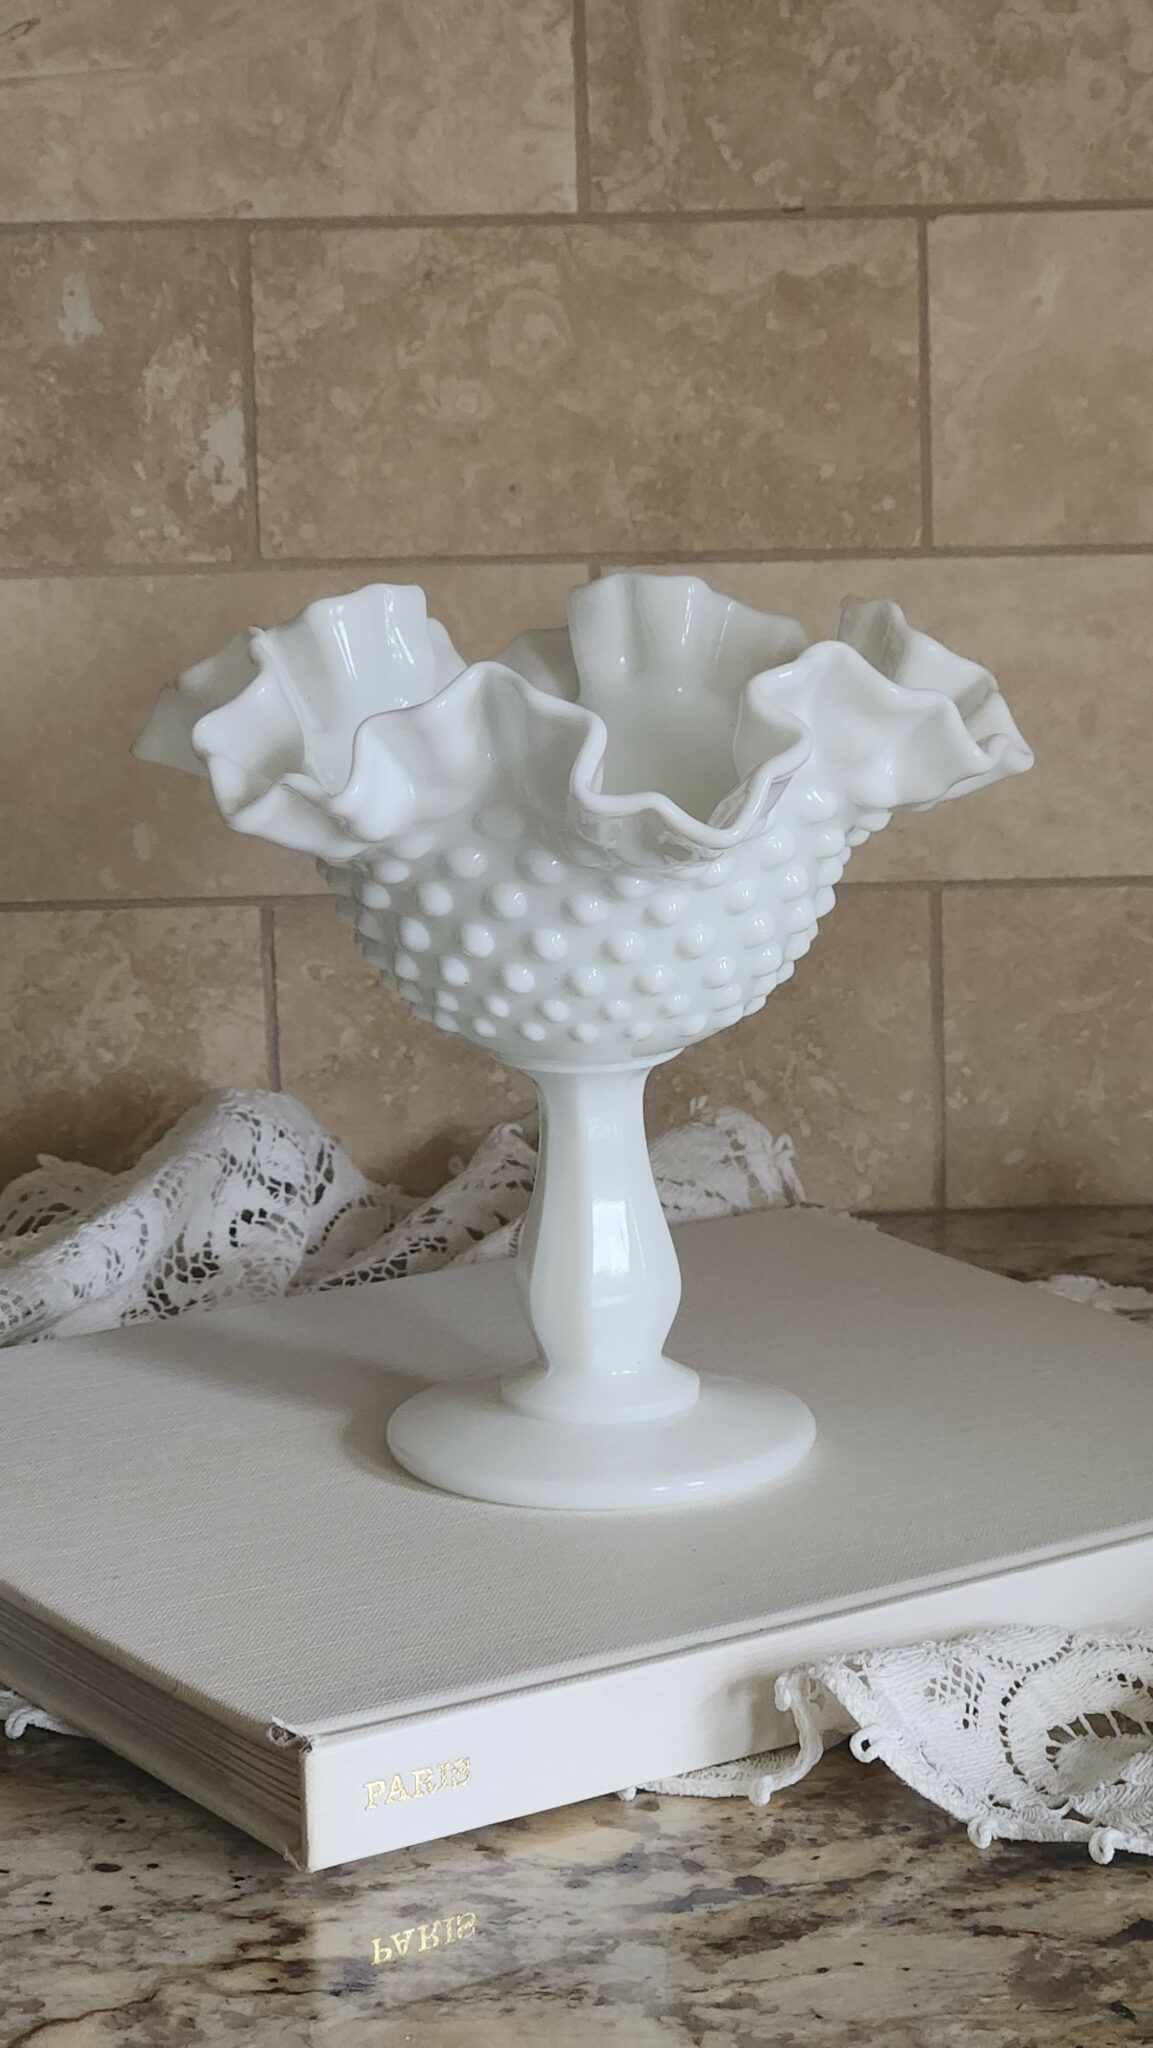 Milk Glass Pedestal Hobnail Dish with Scalloped Edge | Vintage Keepers